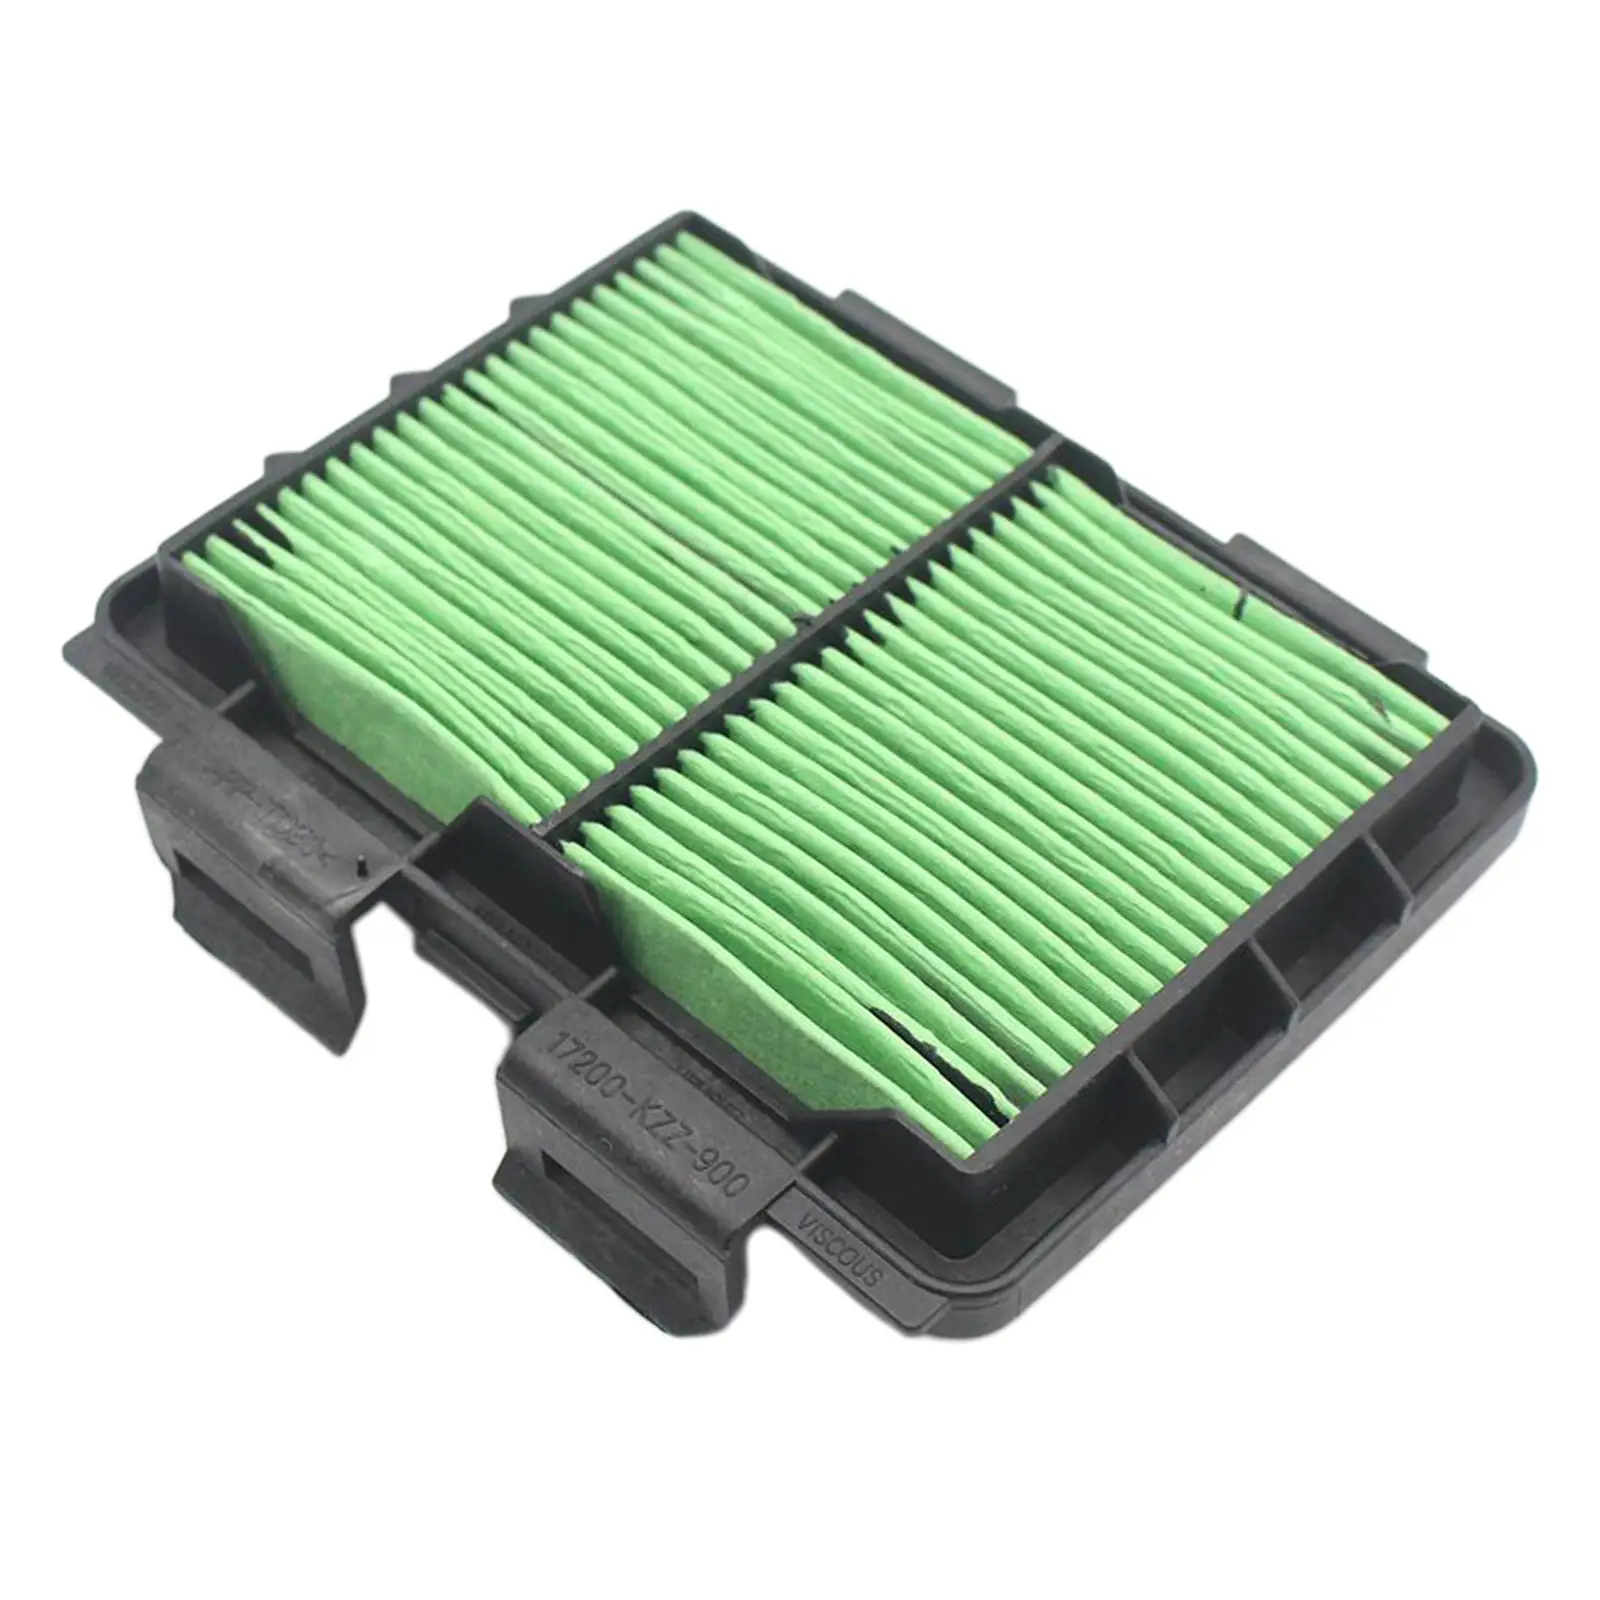 Motorcycle Air Filter Cleaner Replaces fits for HONDA CRF250L CRF250 2013 -2016,